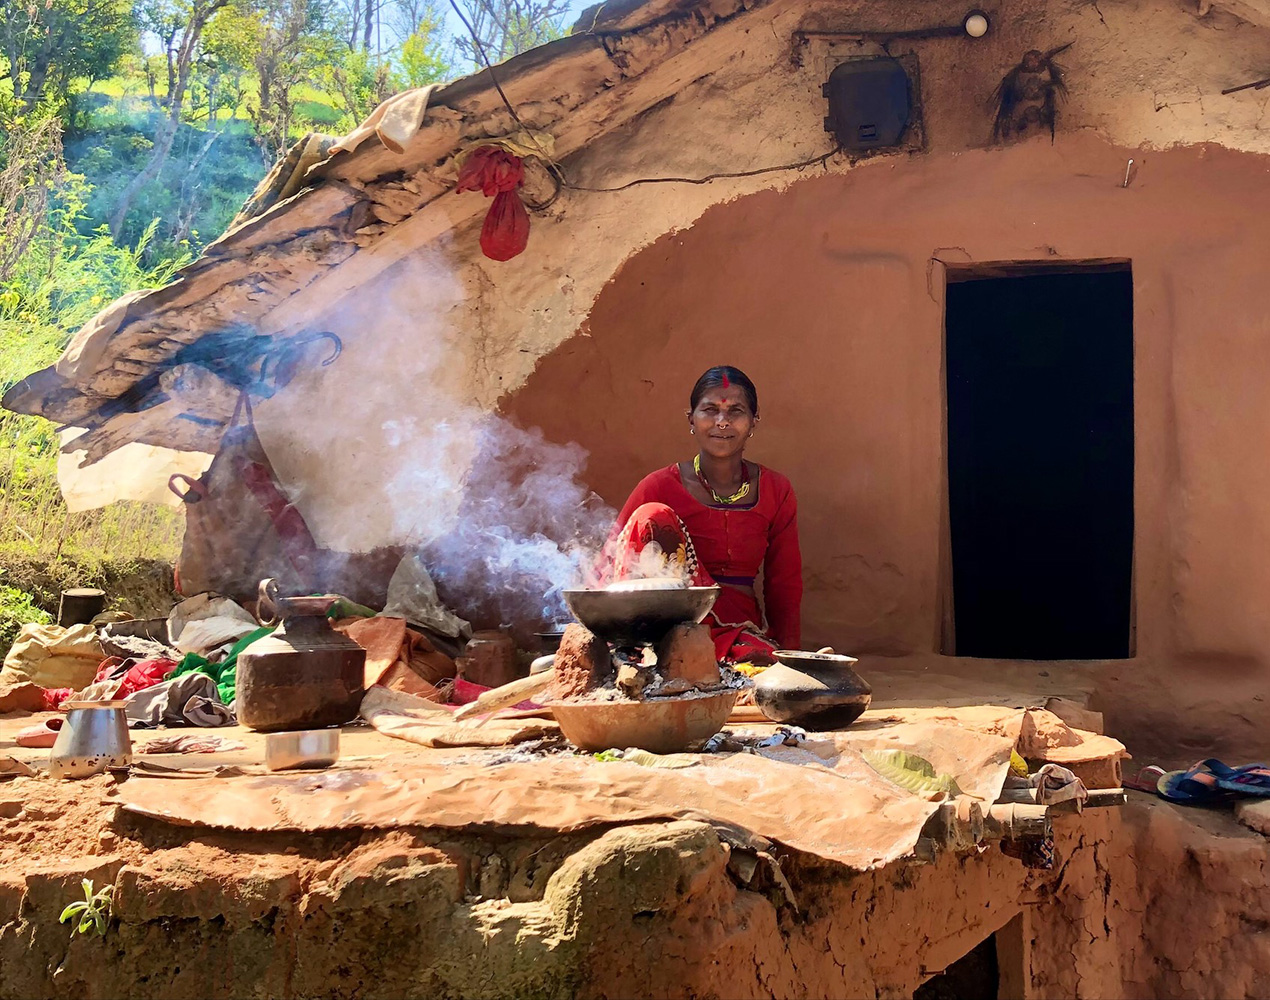 Haliya woman in front of her temporary house, cooking.